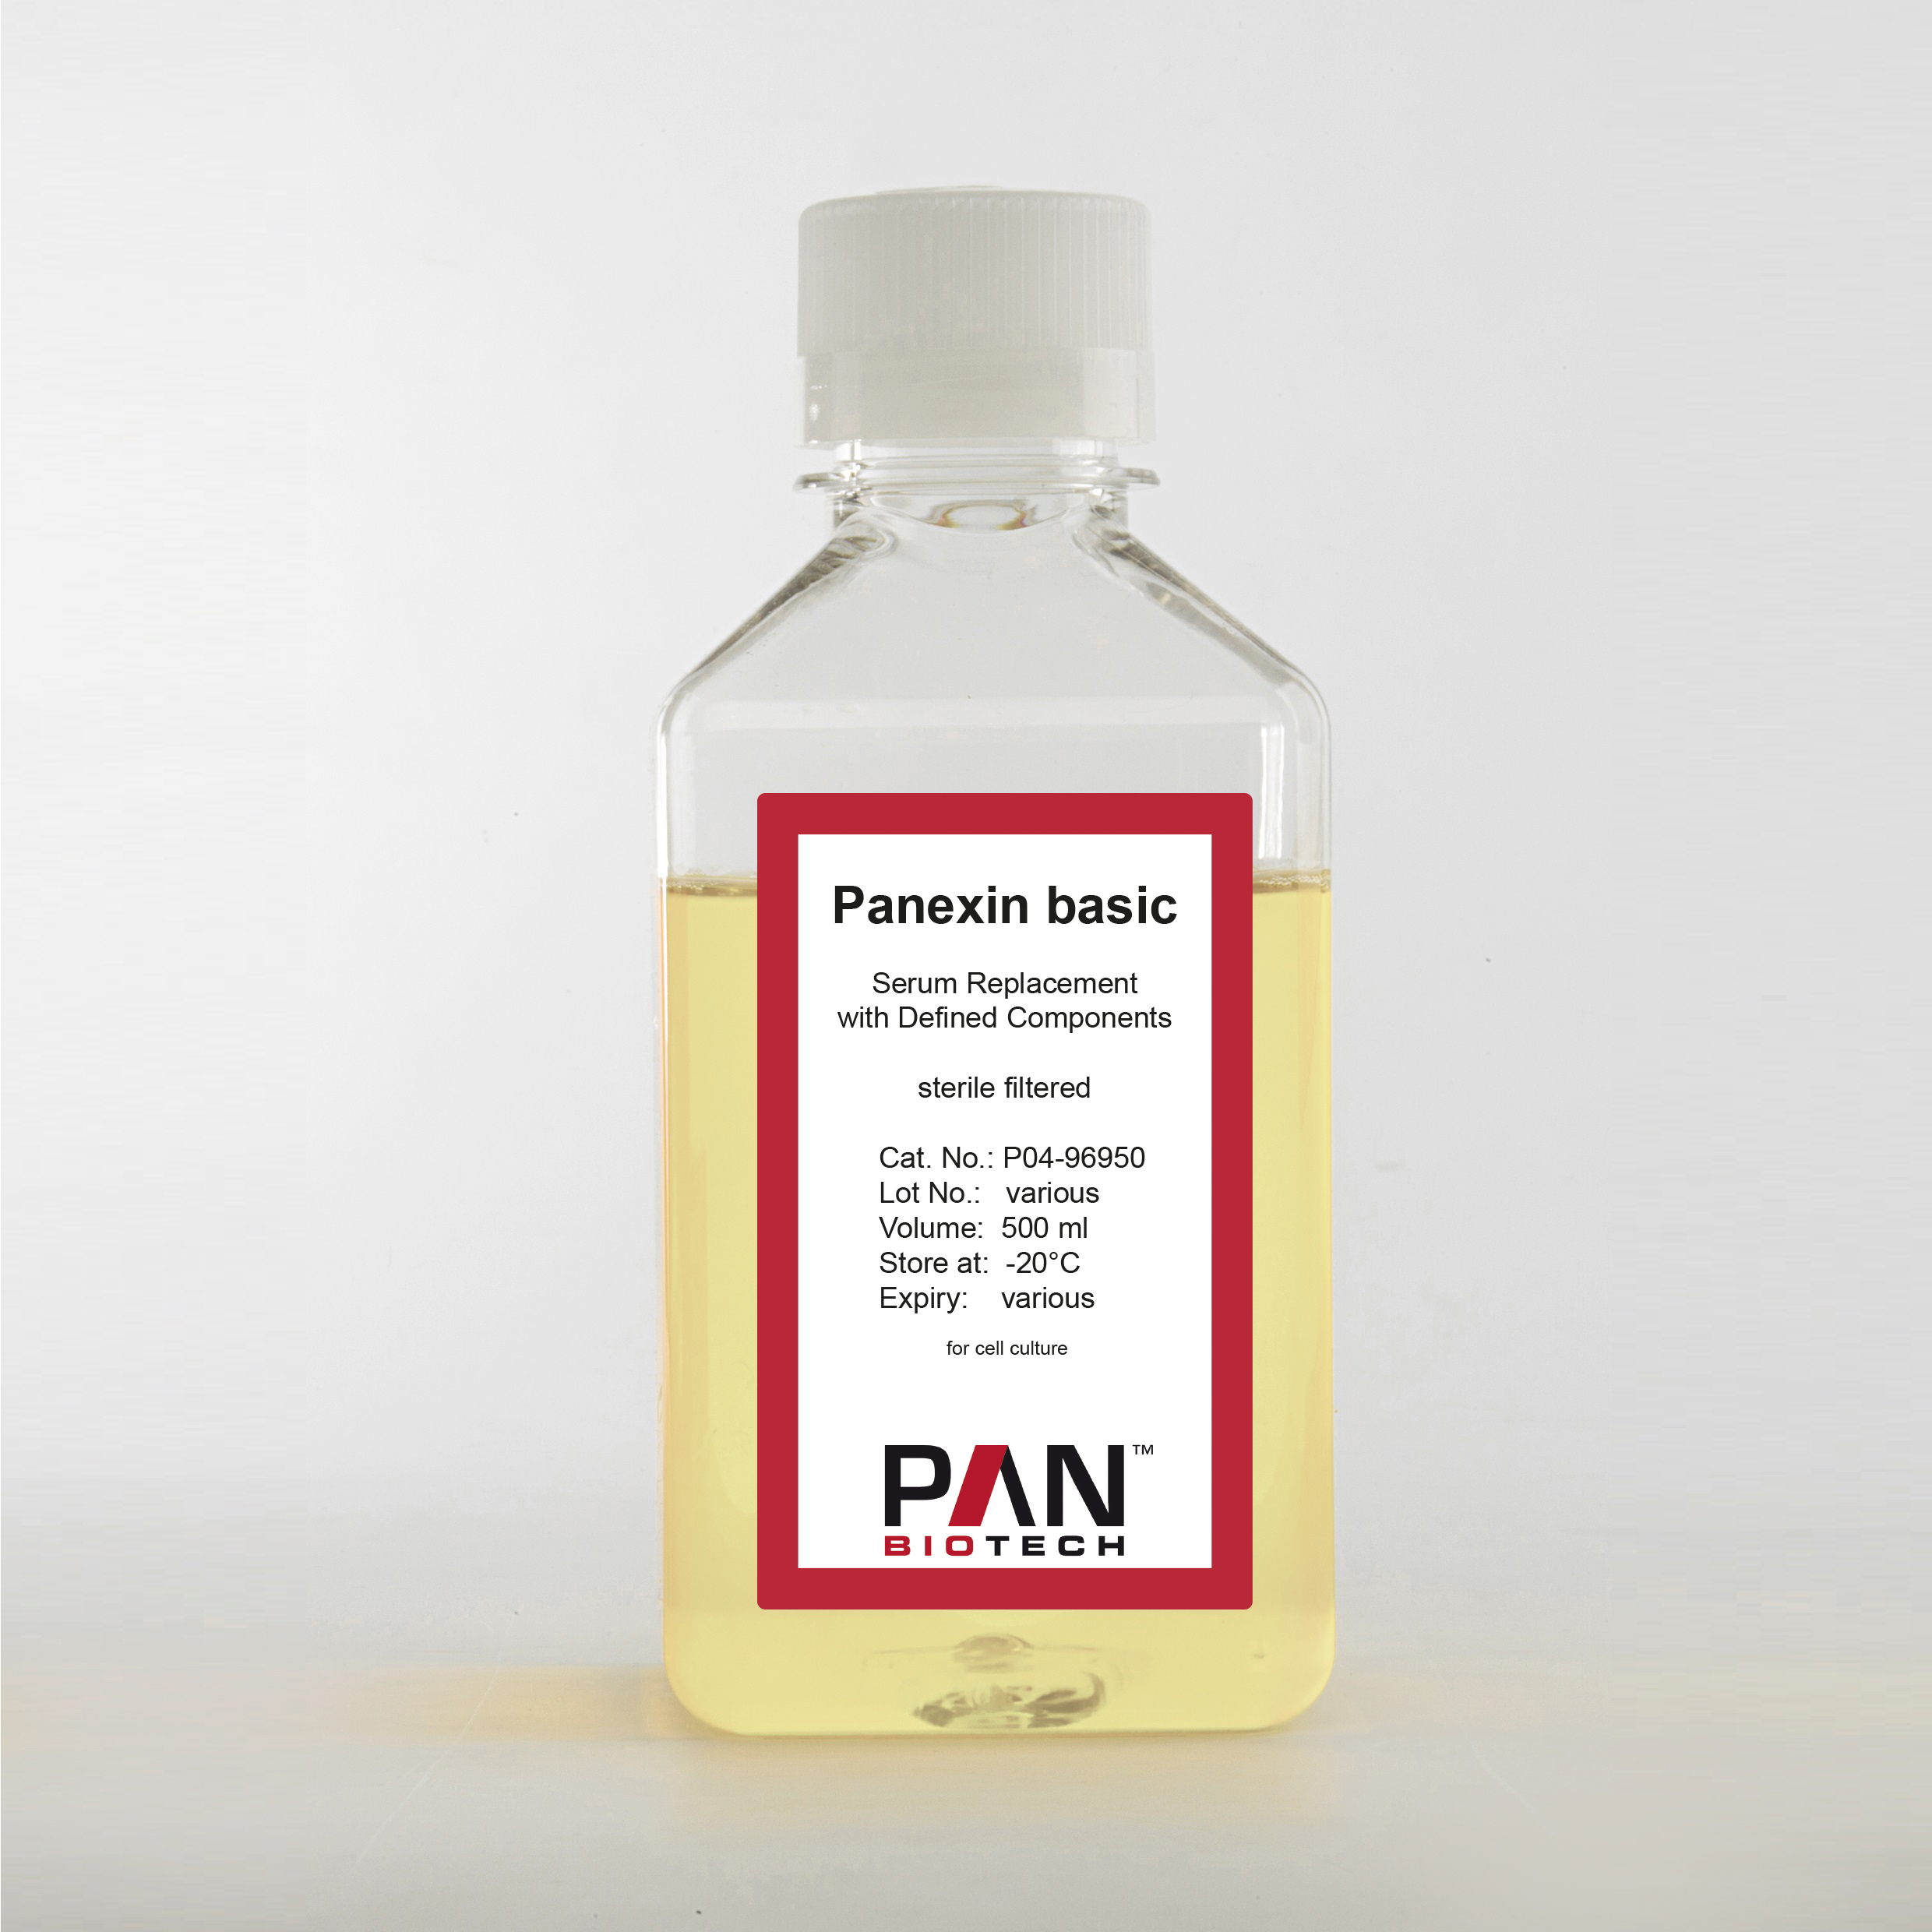 Panexin basic, Serum Replacement with Defined Components